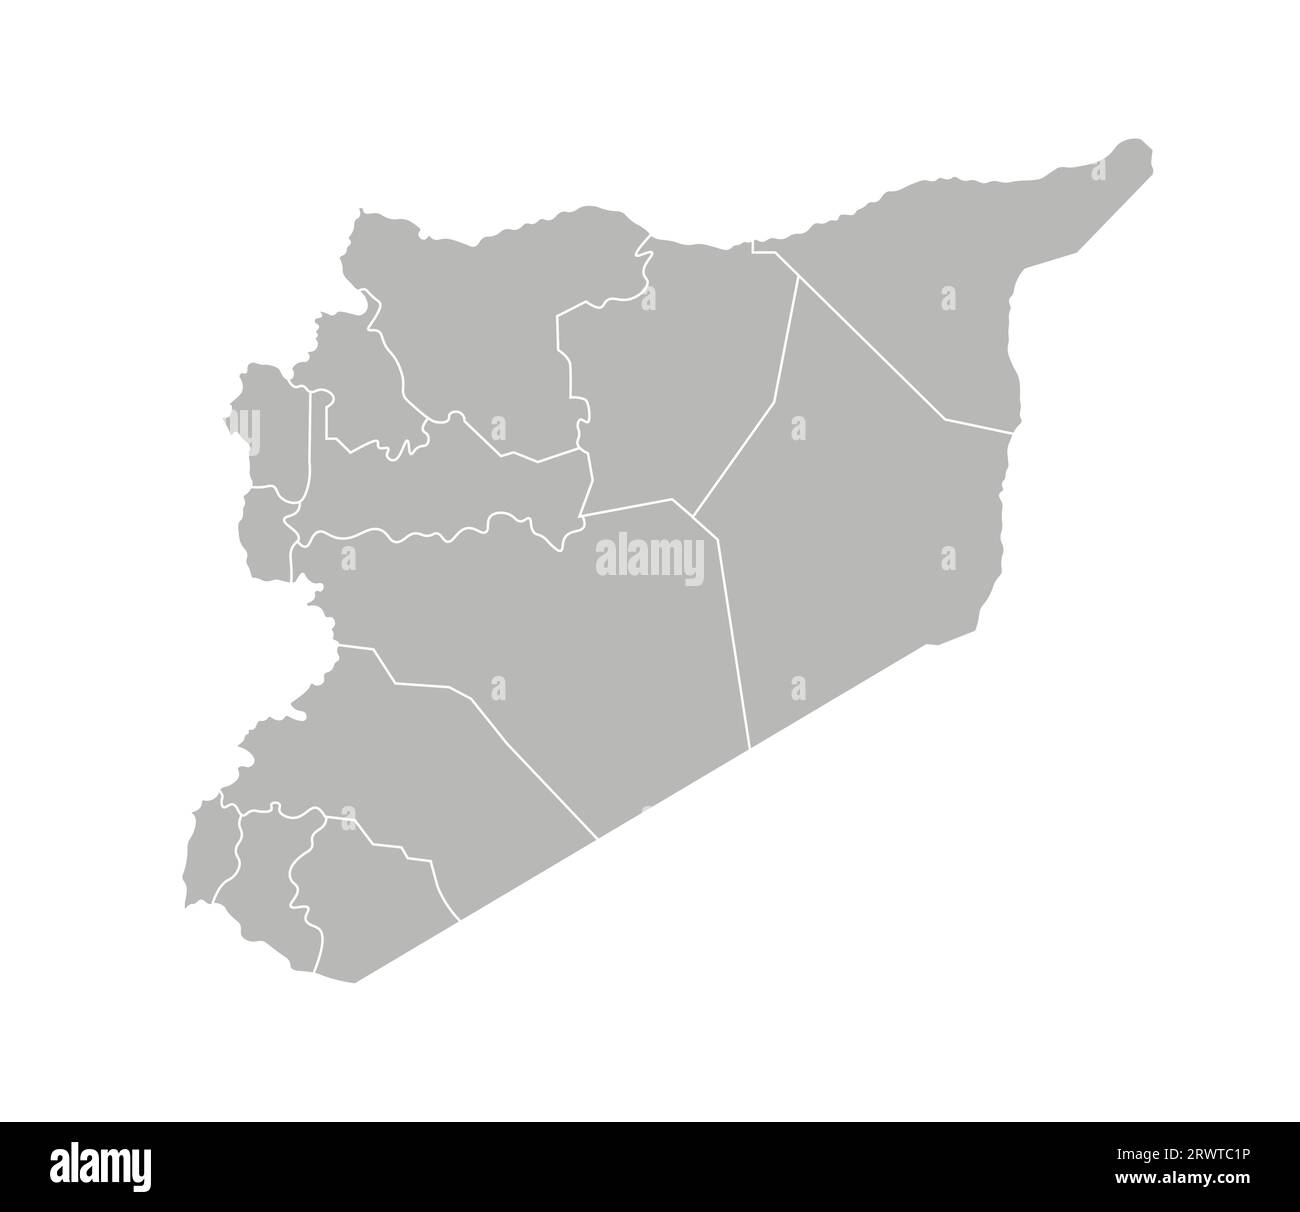 Vector isolated illustration of simplified administrative map of Syria. Borders of the provinces (regions). Grey silhouettes. White outline. Stock Vector